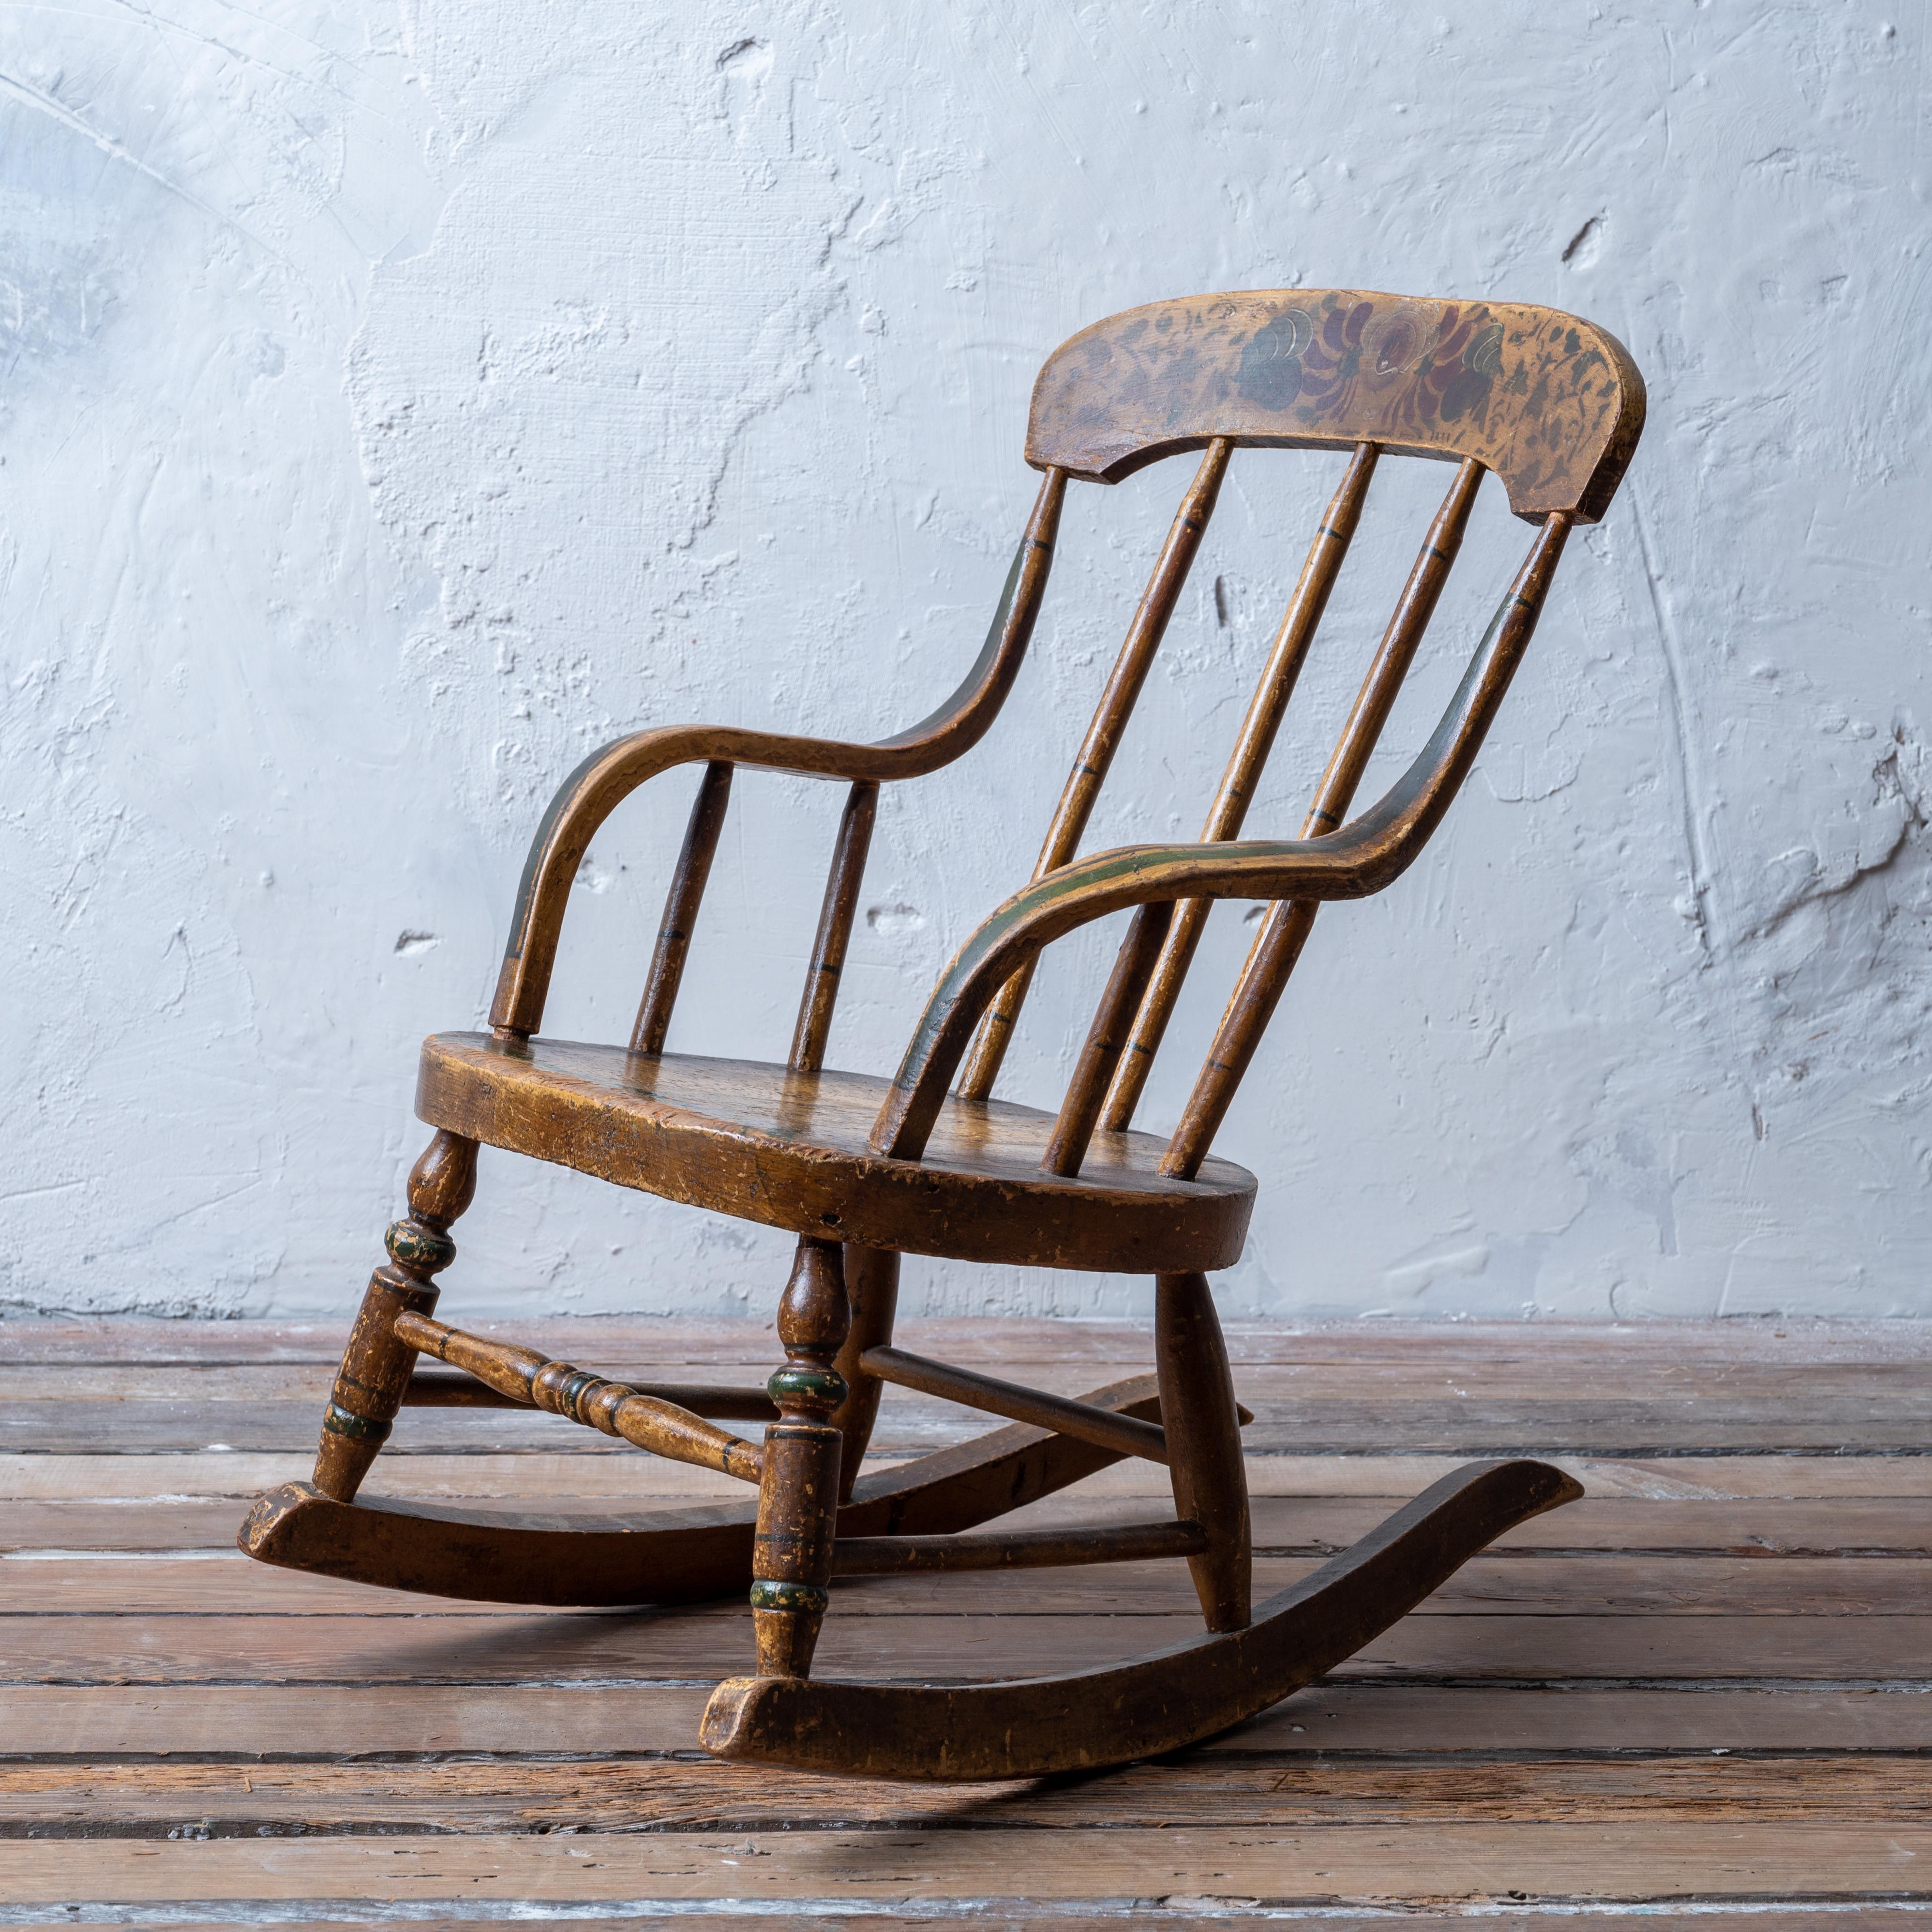 Fancy Painted Child’s Rocking Chair, mid-19th century.

14 inches wide by 18 ½ inches deep by 21 ¾ inches tall
